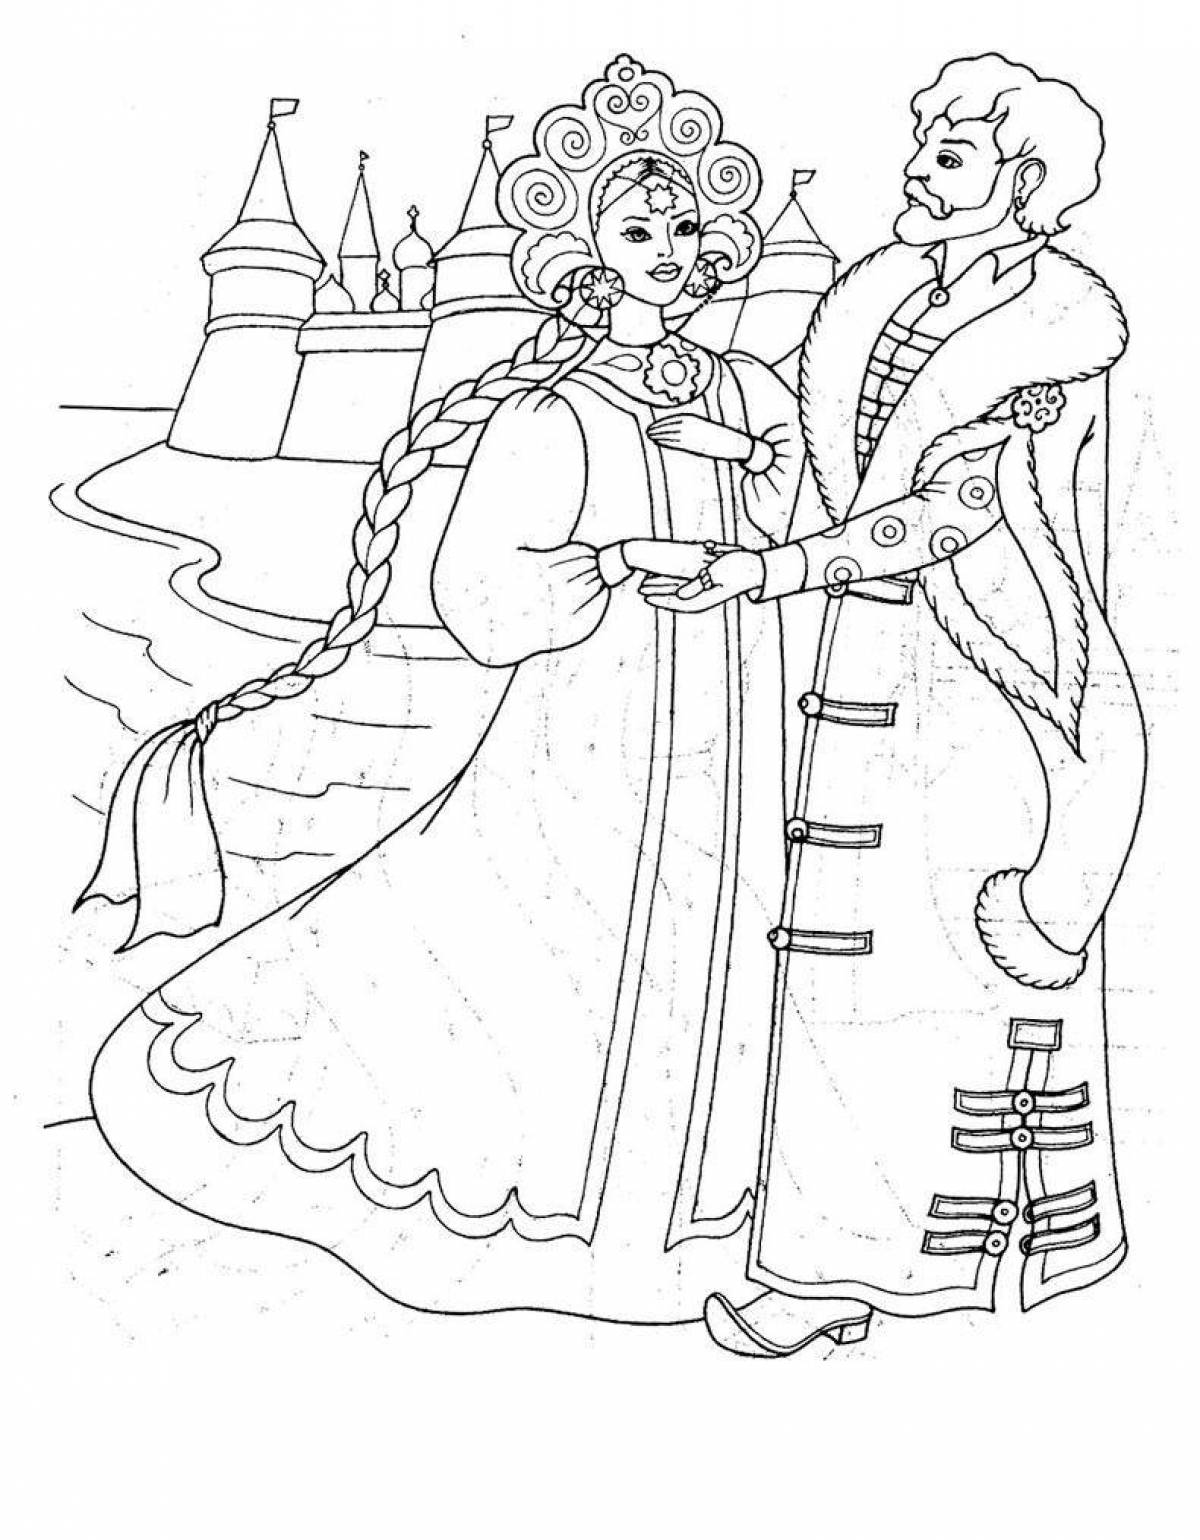 Coloring book based on Pushkin's fairy tales